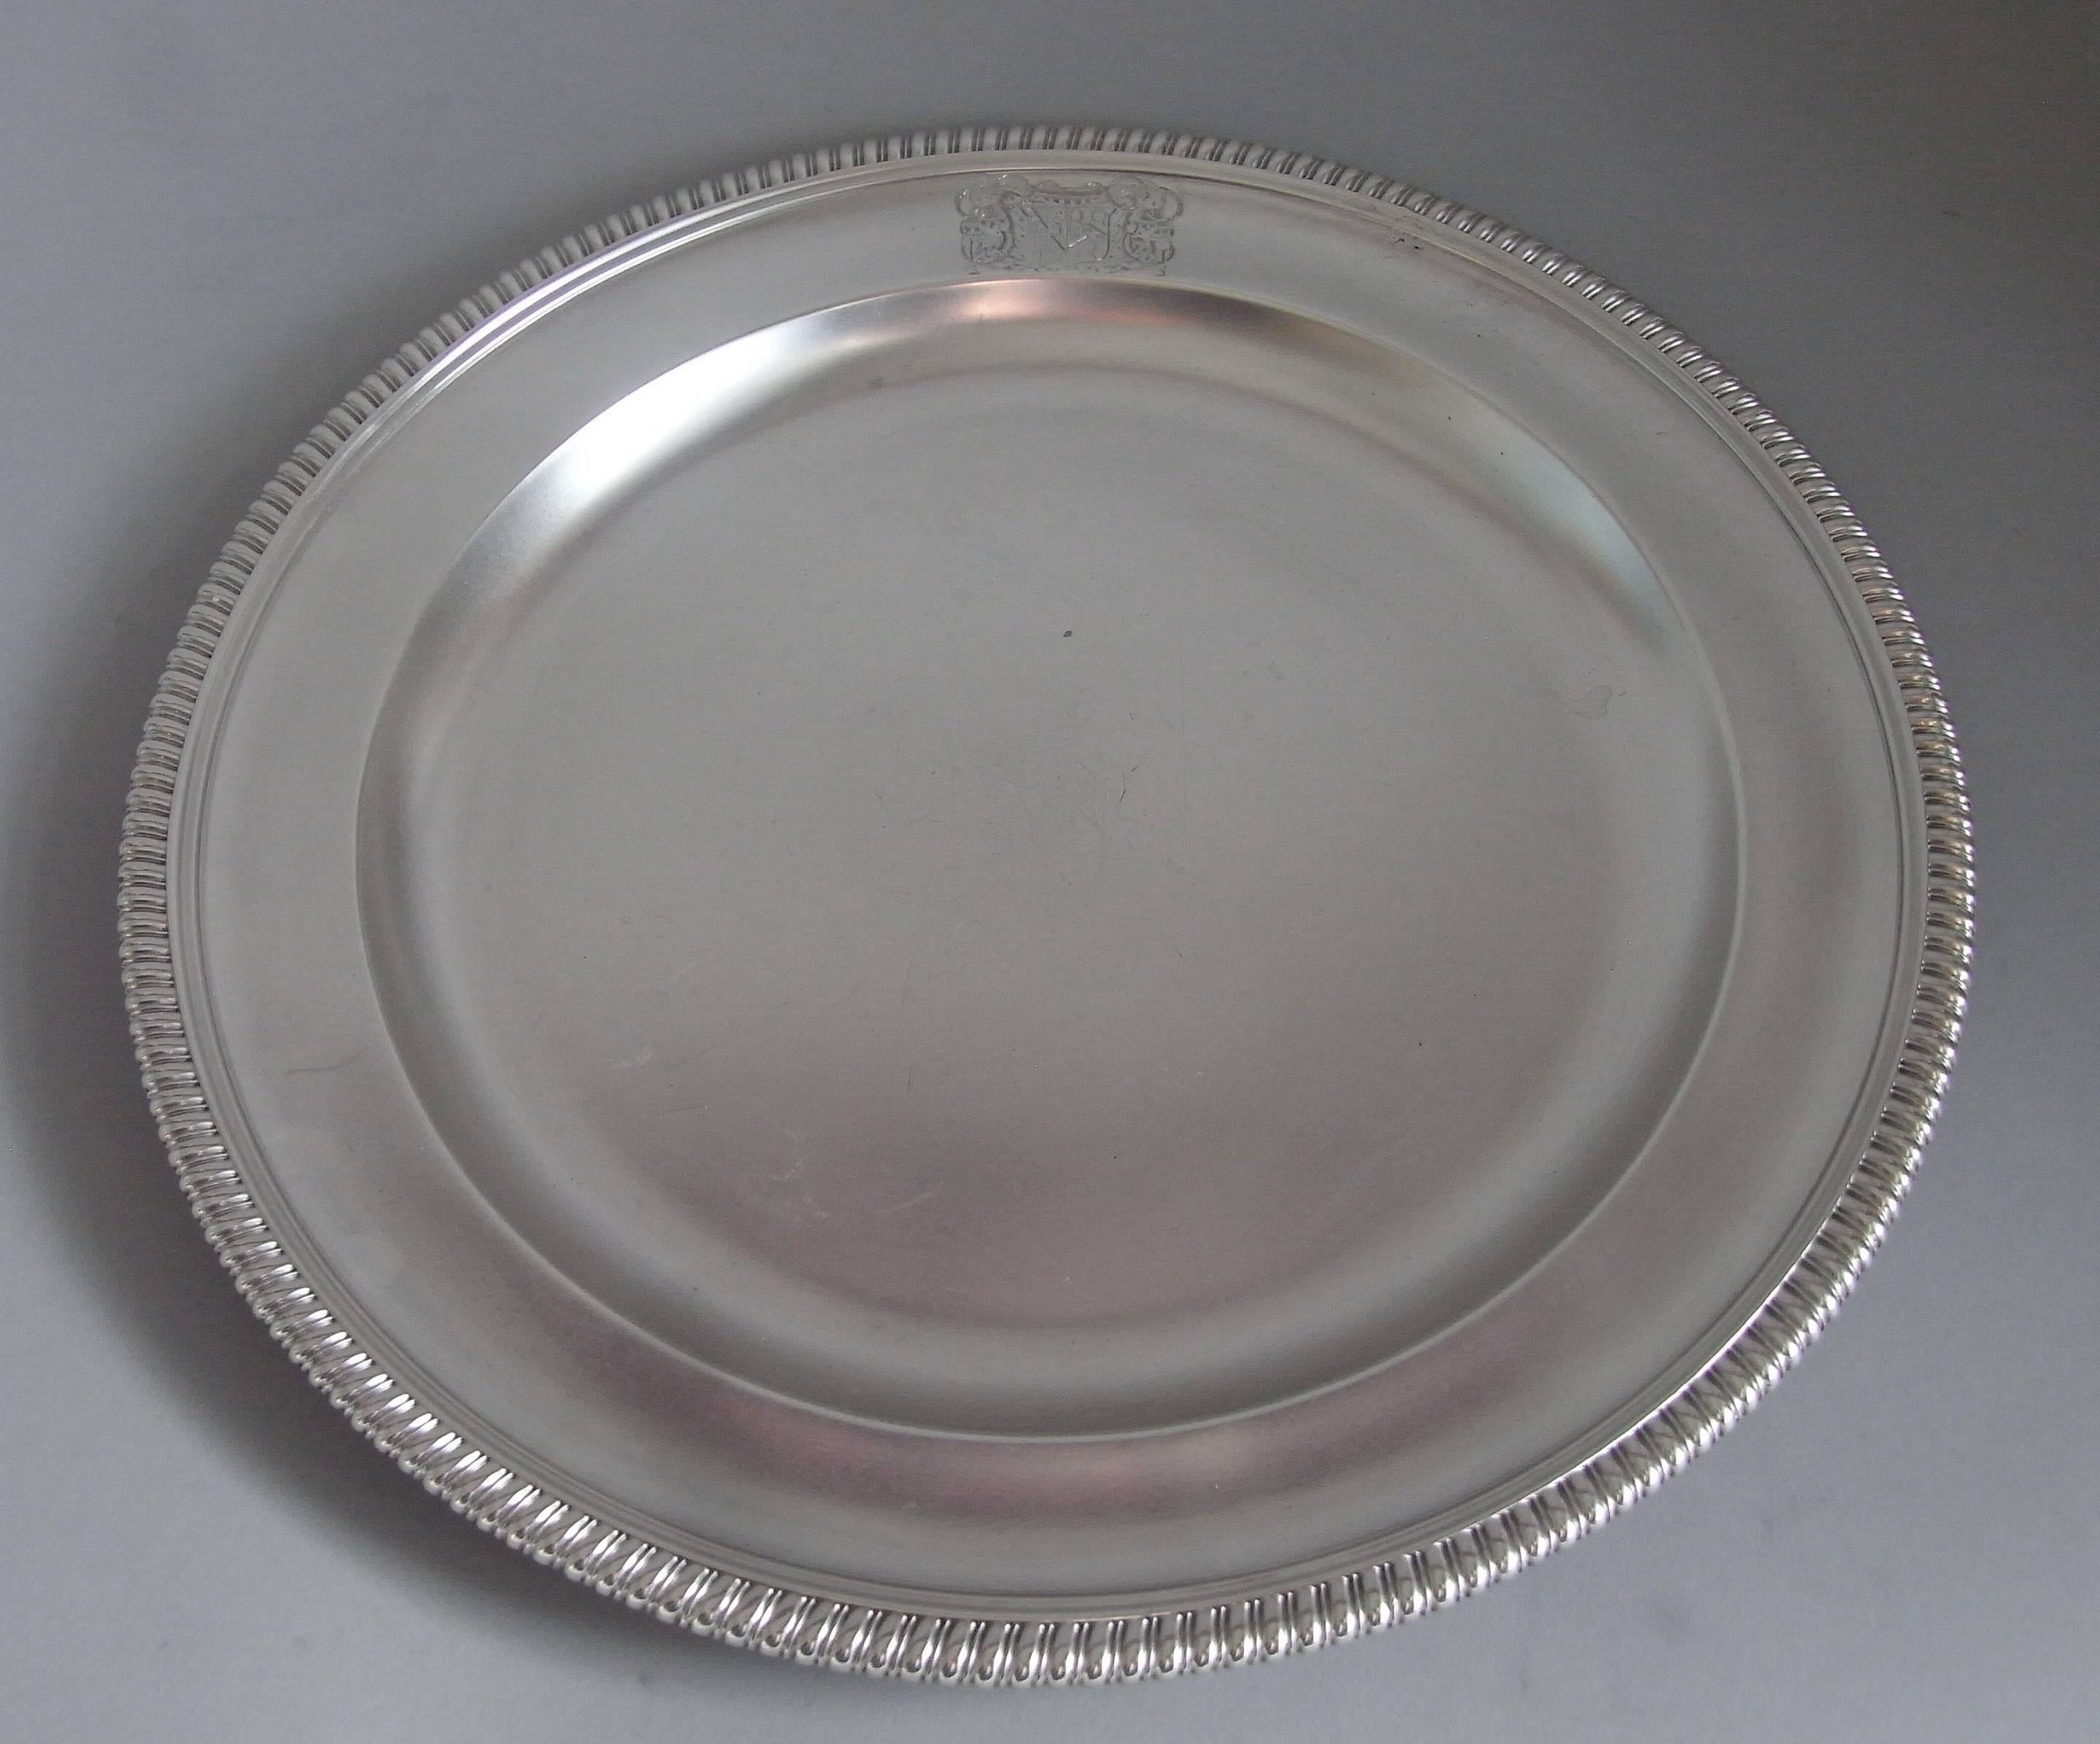 The dishes are circular in form with a raised rim which is decorated with a plain gadrooned band. The border is engraved with a contemporary Armorial surrounded by a cartouche of drapery mantling, which was a typical design at this date. The dishes